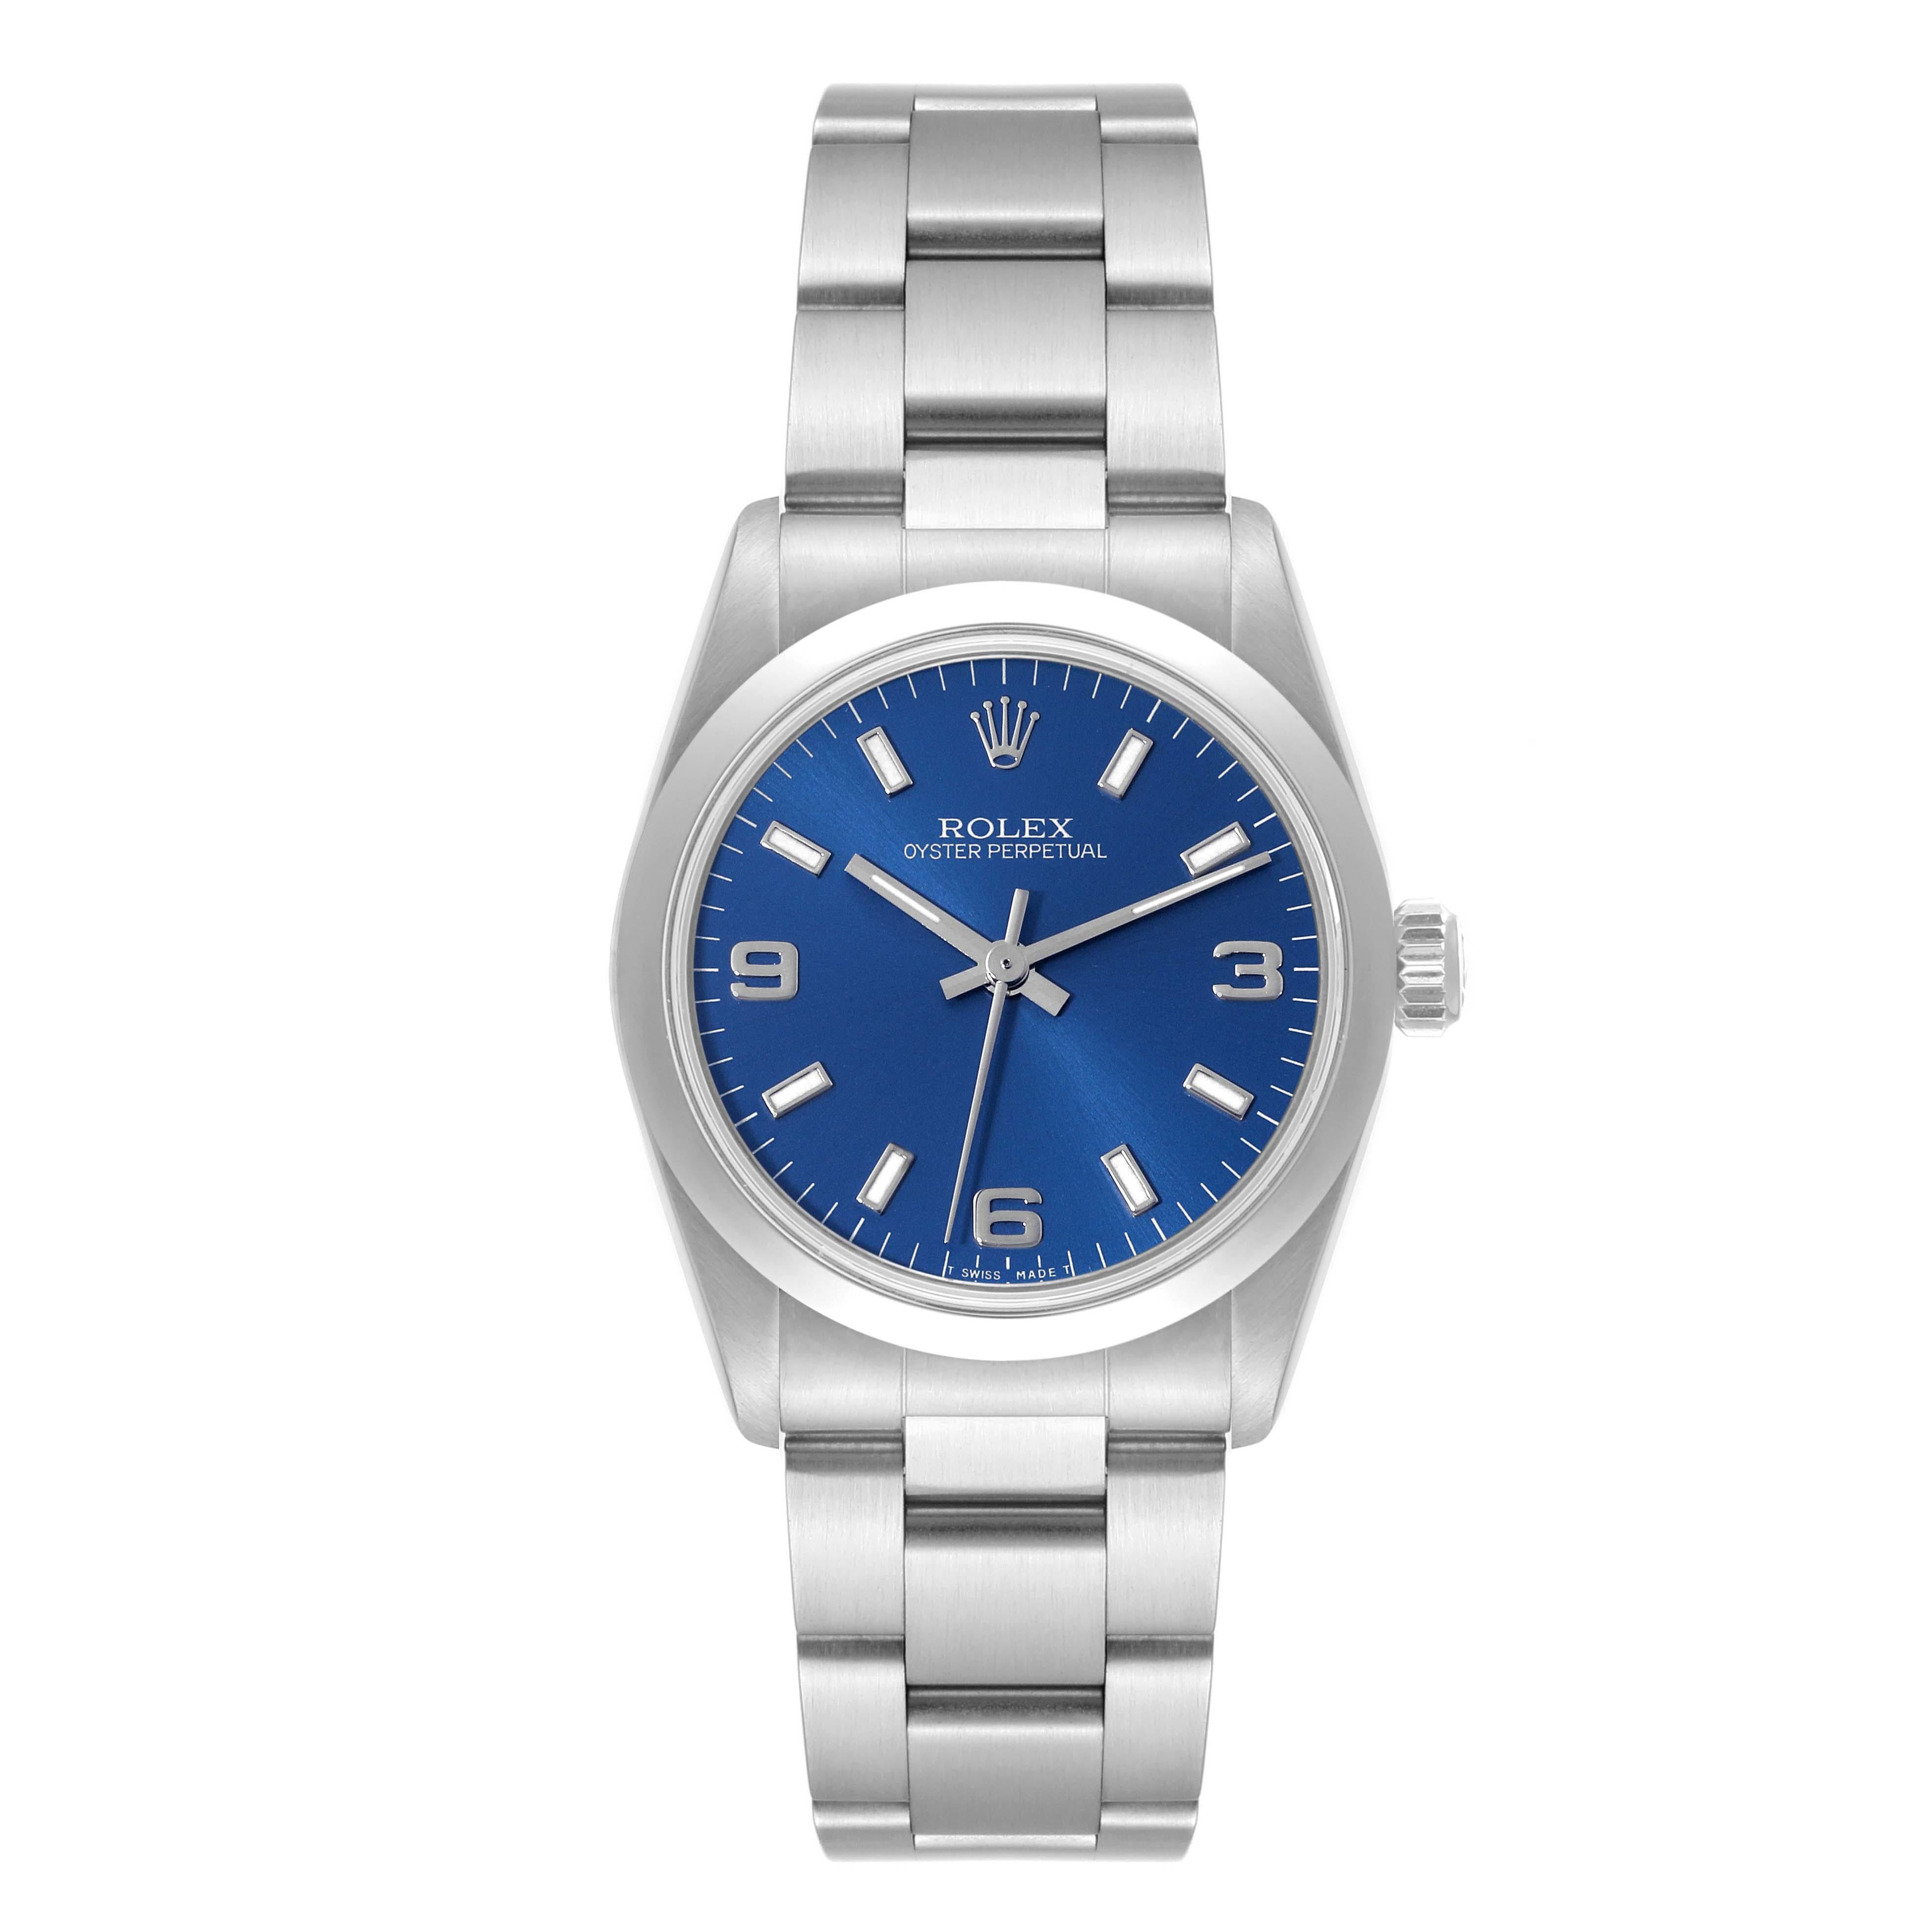 Rolex Midsize Blue Dial Automatic Steel Ladies Watch 67480 Box Papers. Automatic self-winding movement. Stainless steel oyster case 31.0 mm in diameter. Rolex logo on the crown. Stainless steel smooth bezel. Scratch resistant sapphire crystal. Blue